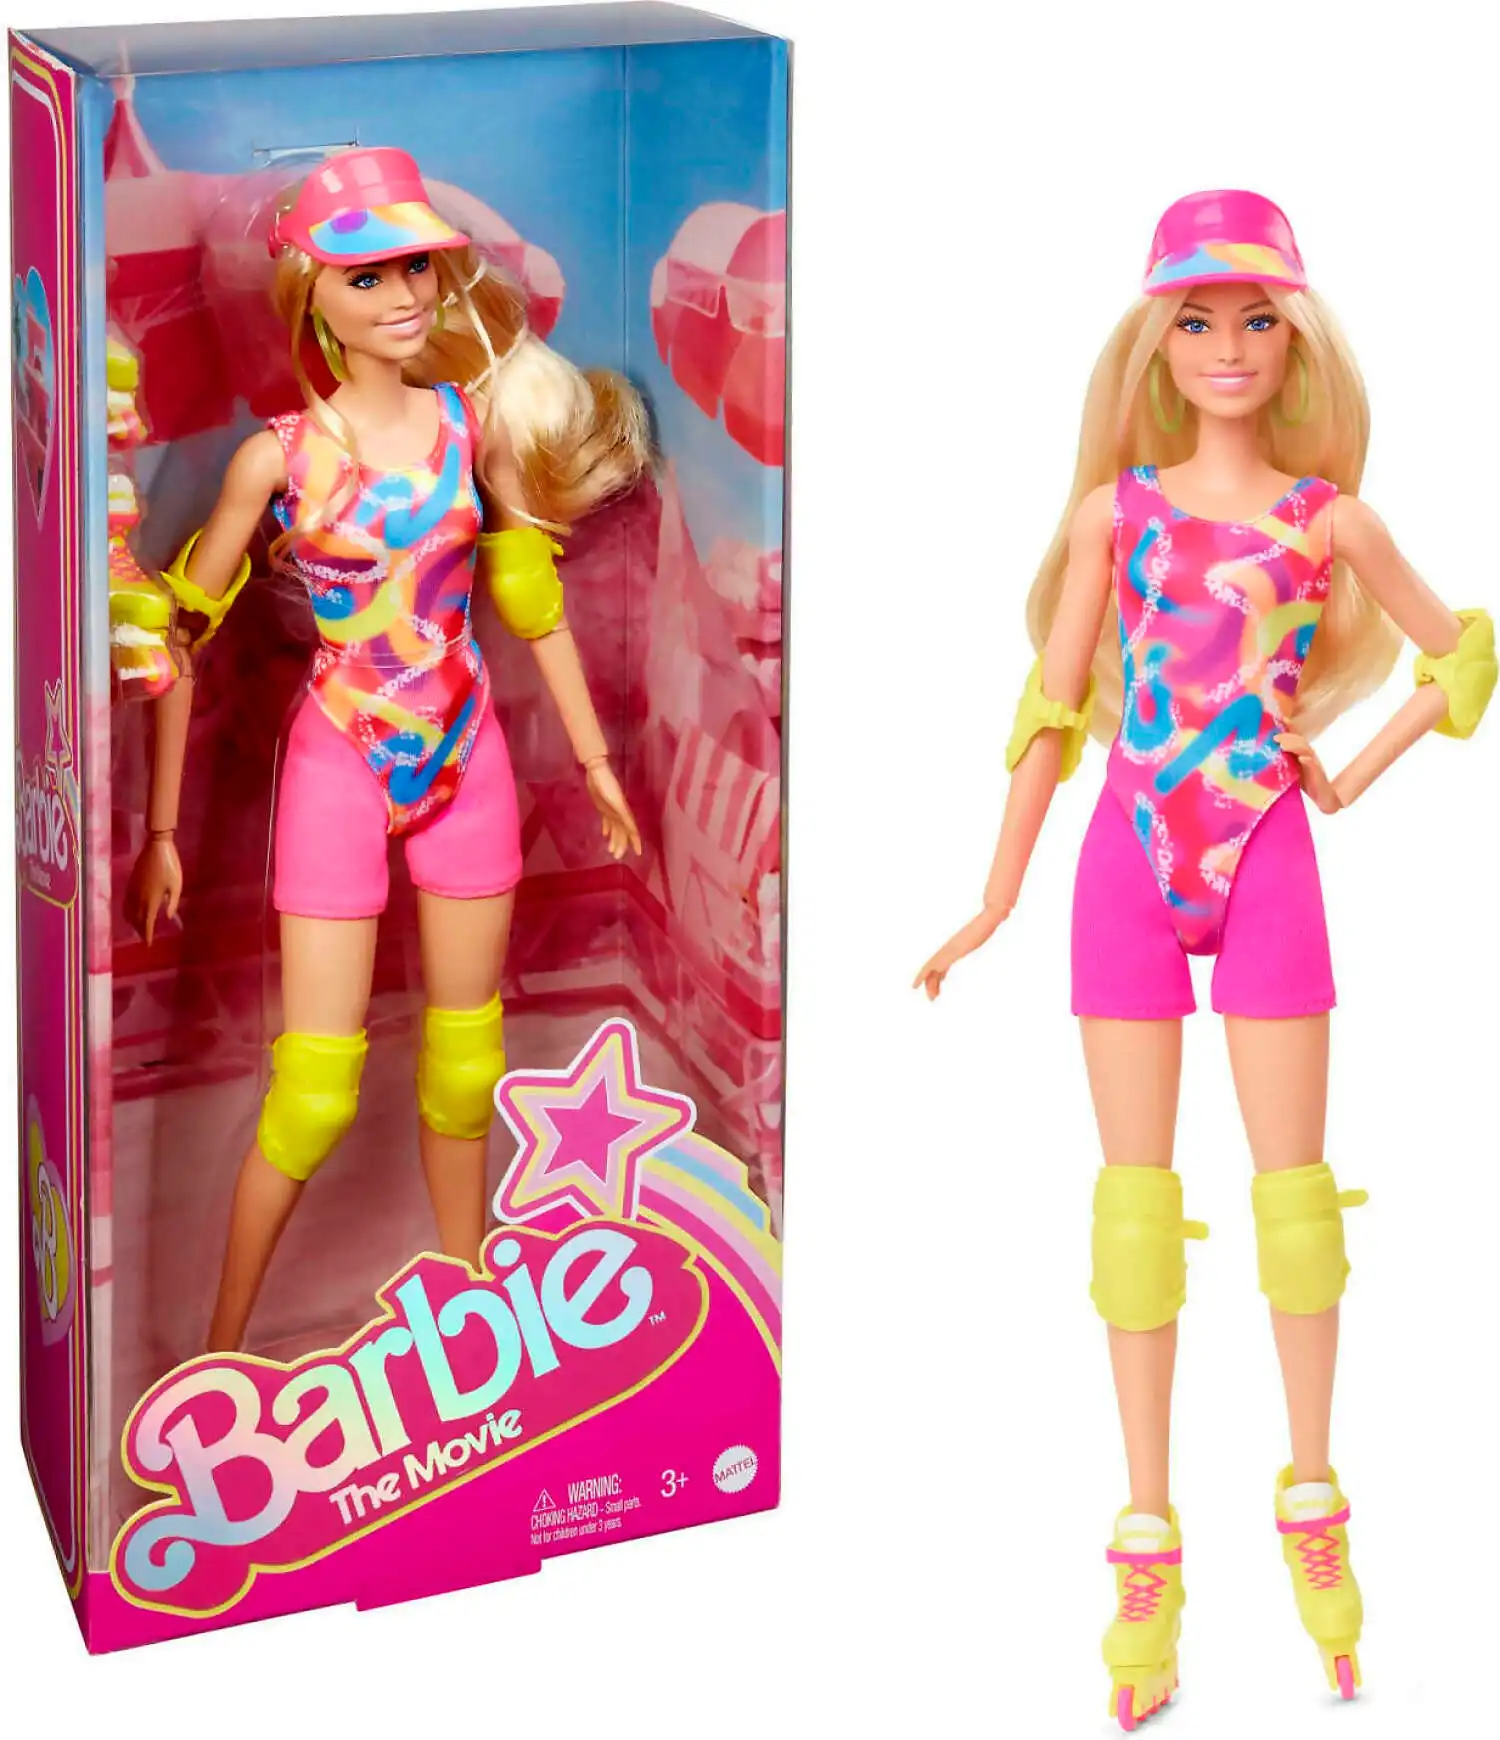 Barbie - The Movie Collectible Doll Margot Robbie As Barbie In Inline Skating Outfit - Mattel